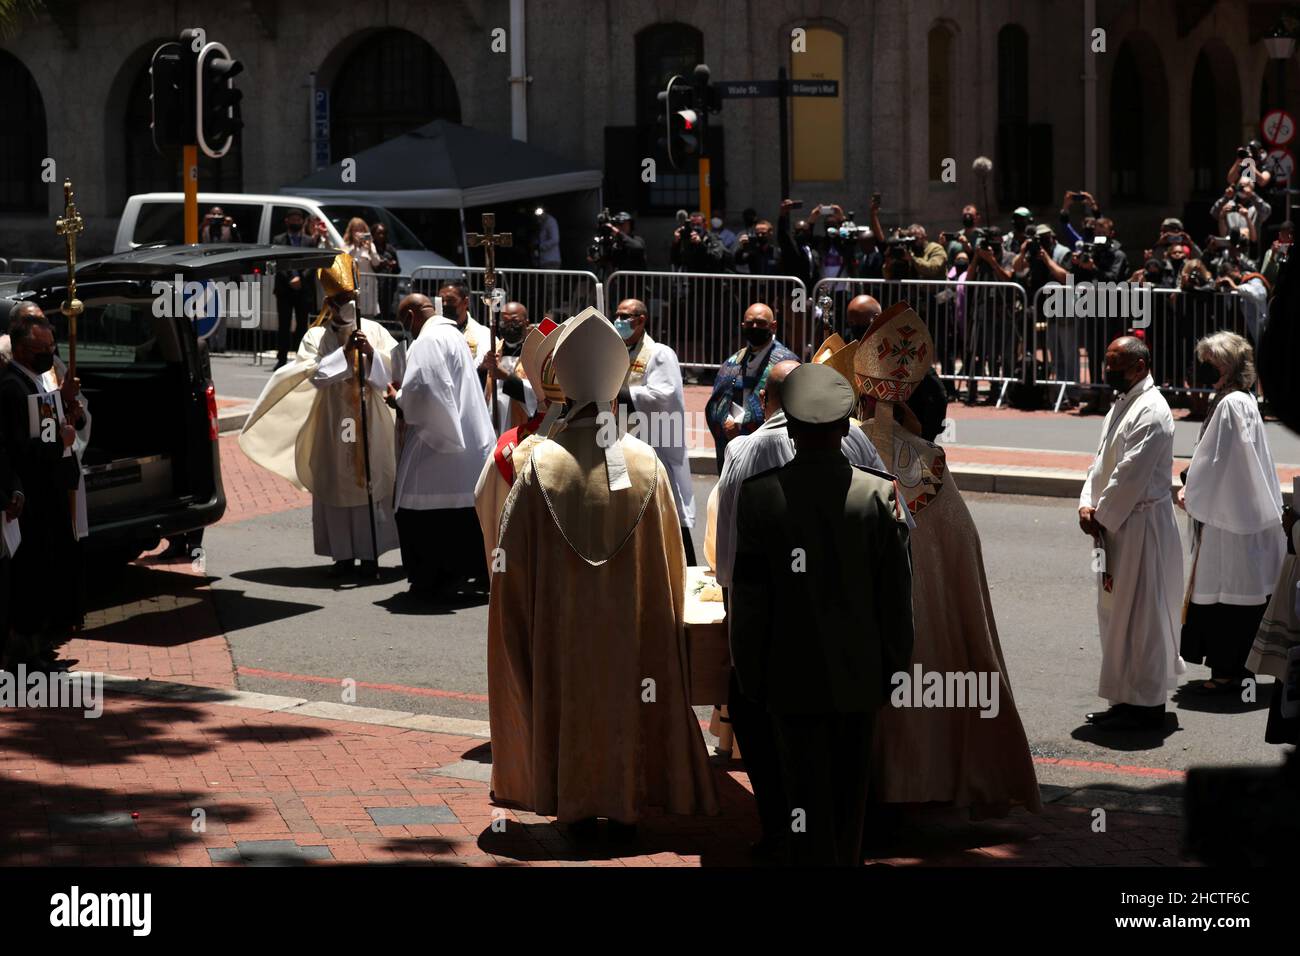 Pallbearers carry the casket holding the body of Archbishop Desmond Tutu after his funeral service at St George's Cathedral in Cape Town, South Africa, January 1, 2022. REUTERS/Mike Hutchings Stock Photo